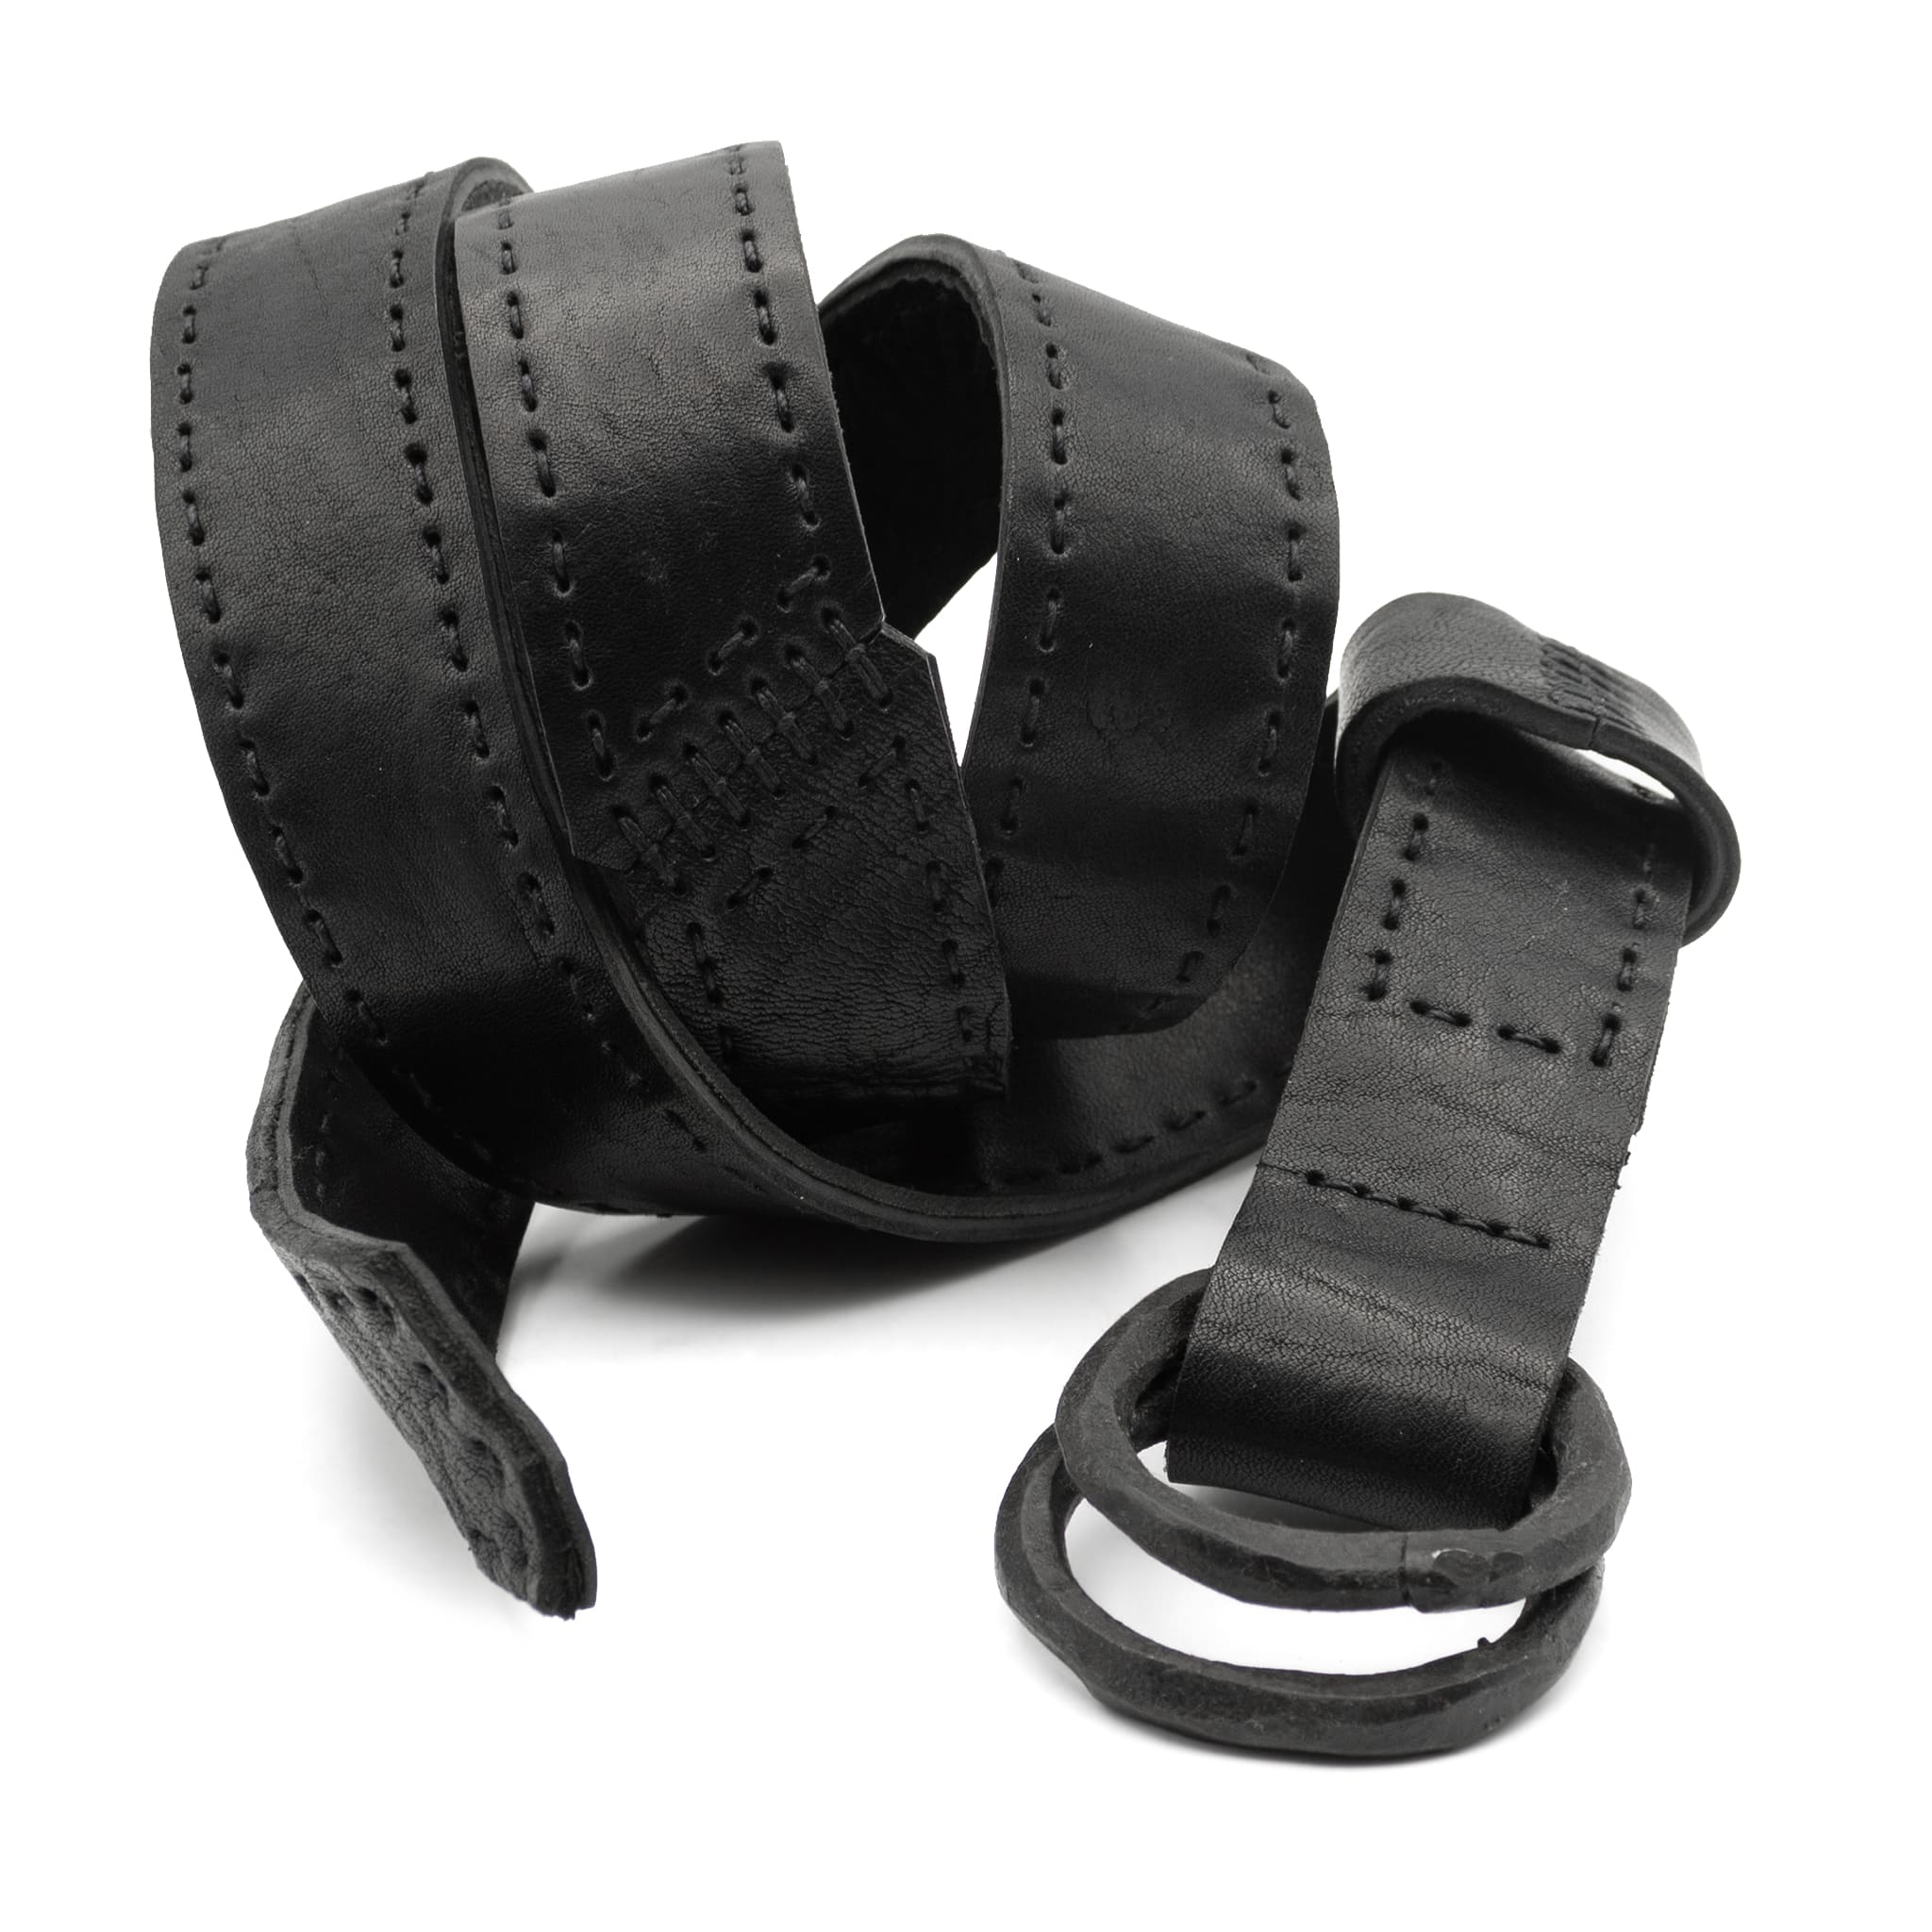 double layered matte black horse leather belt with hand forged black iron rings expertly hand sewn by independent UK based designer atelier SKN.